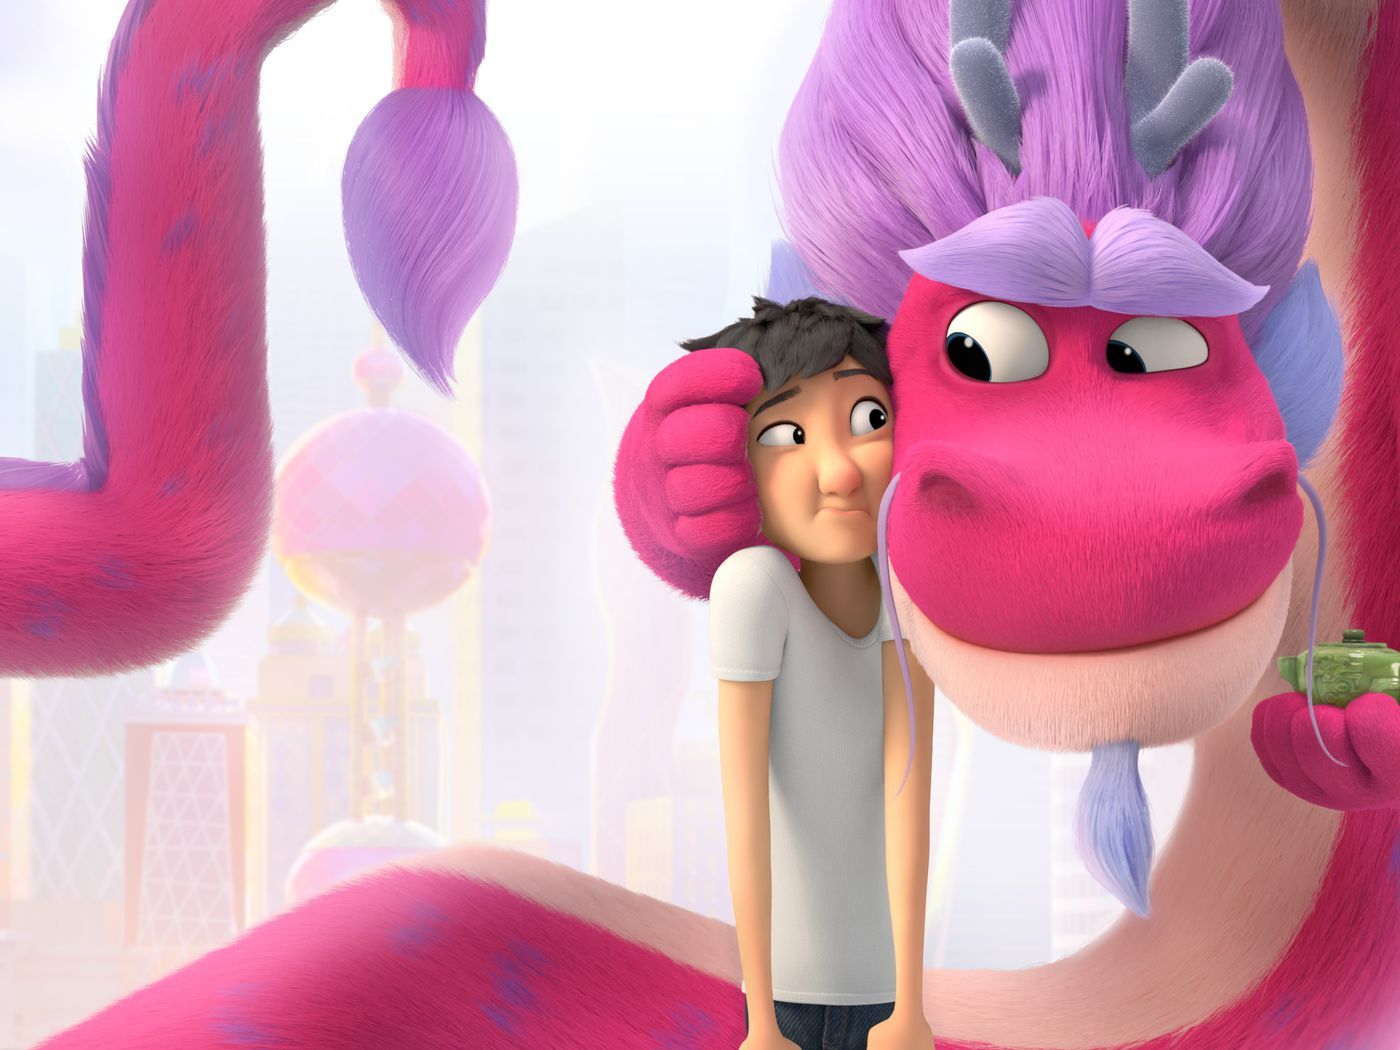 Wish Dragon review: Netflix's animated film is more than an Aladdin knockoff